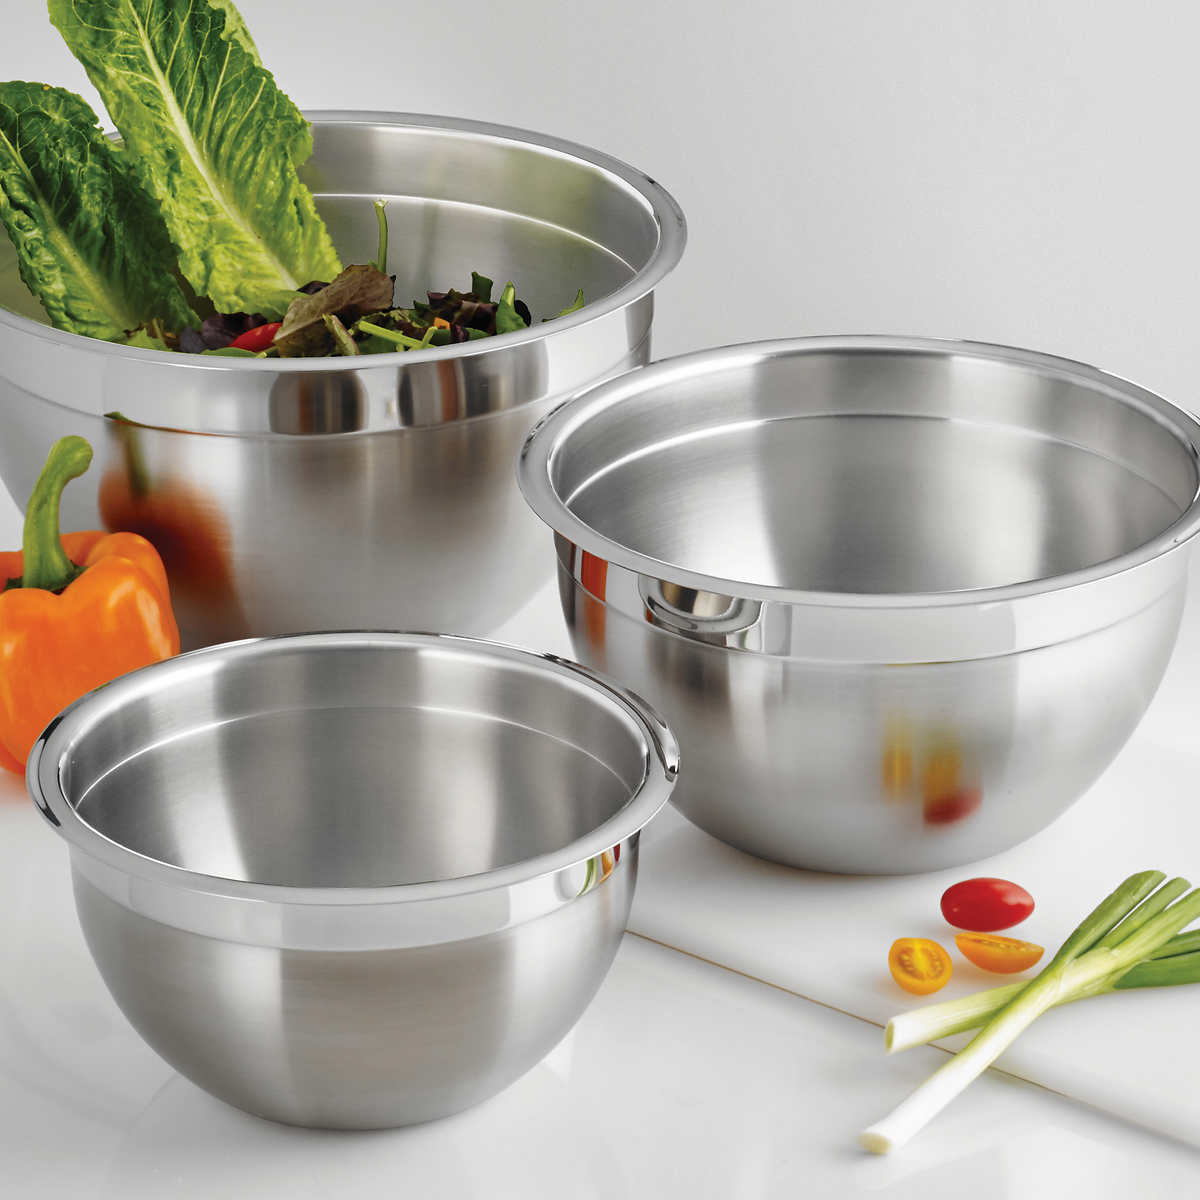 Spectrum Stainless Steel Mixing Bowl for Tossing Salads and Meal Prep (Set  of 4) 19035-078 - The Home Depot